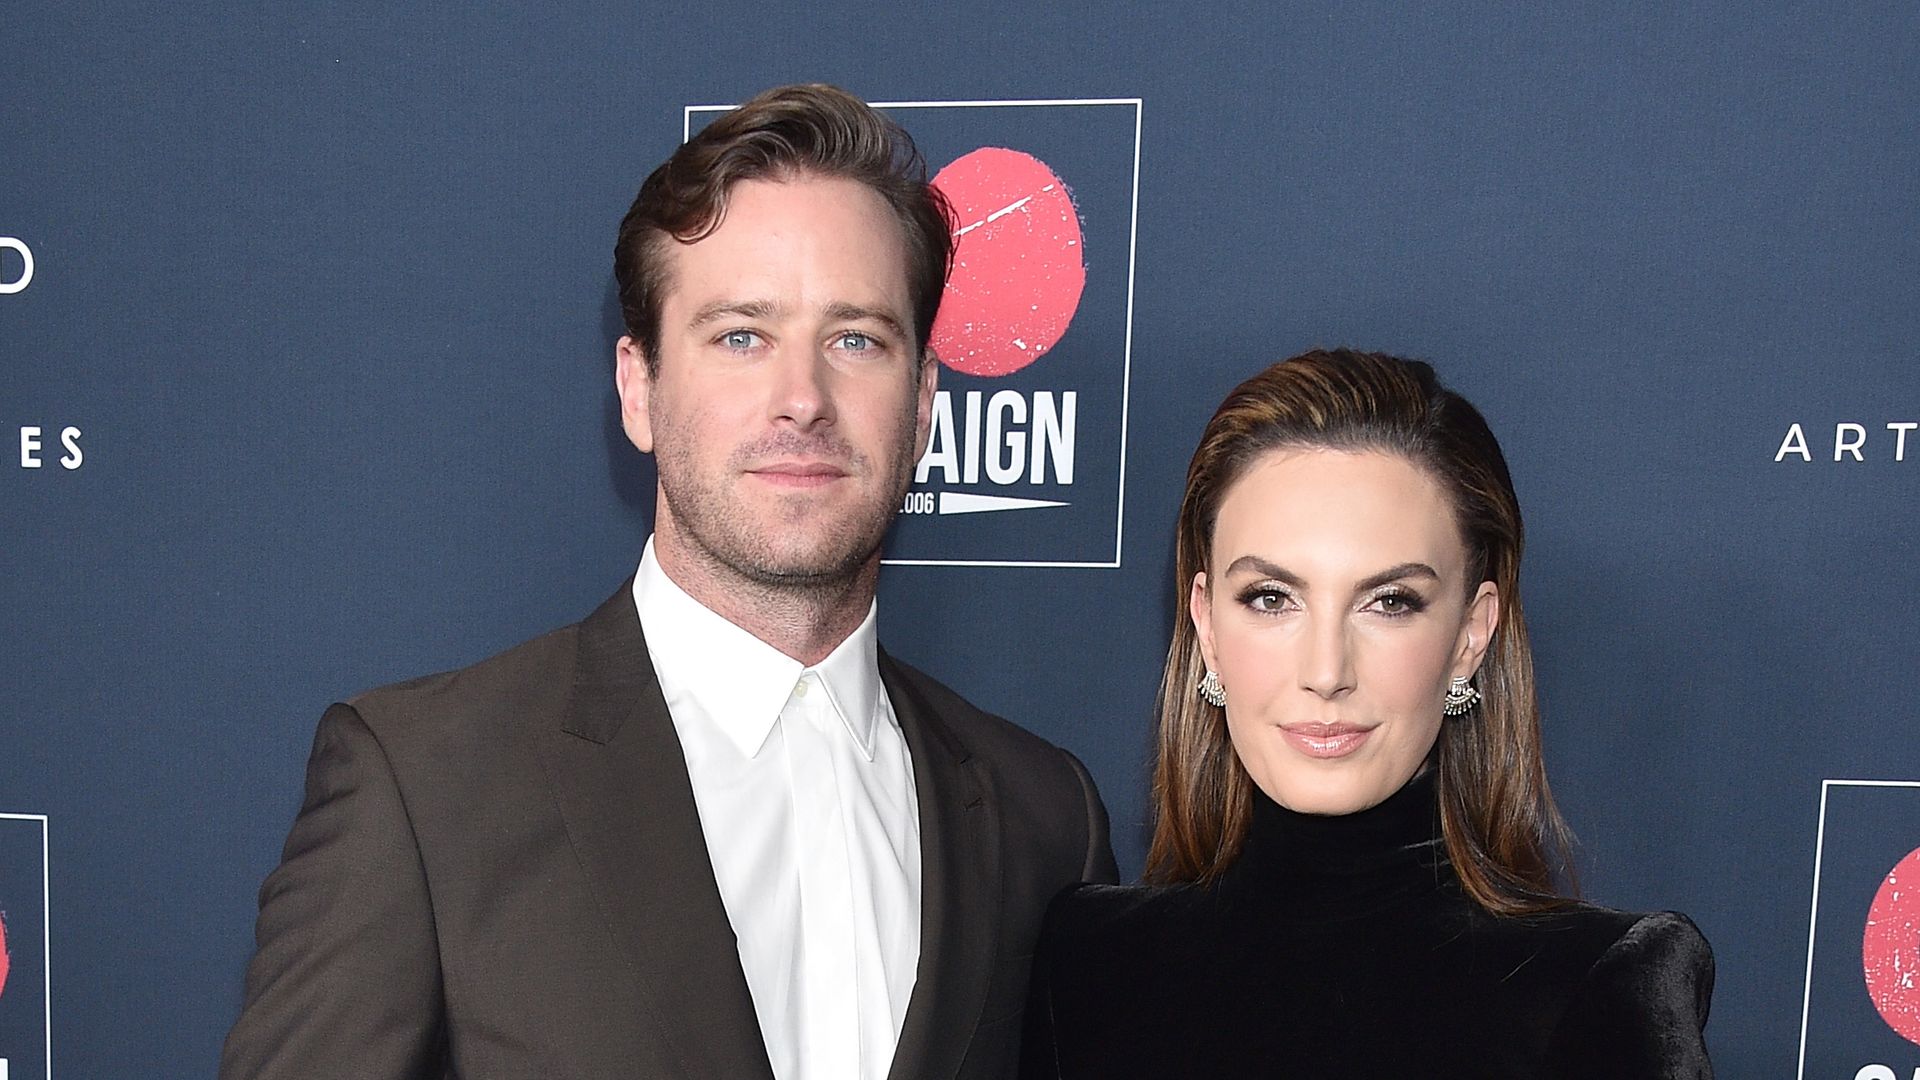 Armie Hammer's ex-wife Elizabeth Chambers: all about her new boyfriend and TV series on 'toxic relationships'